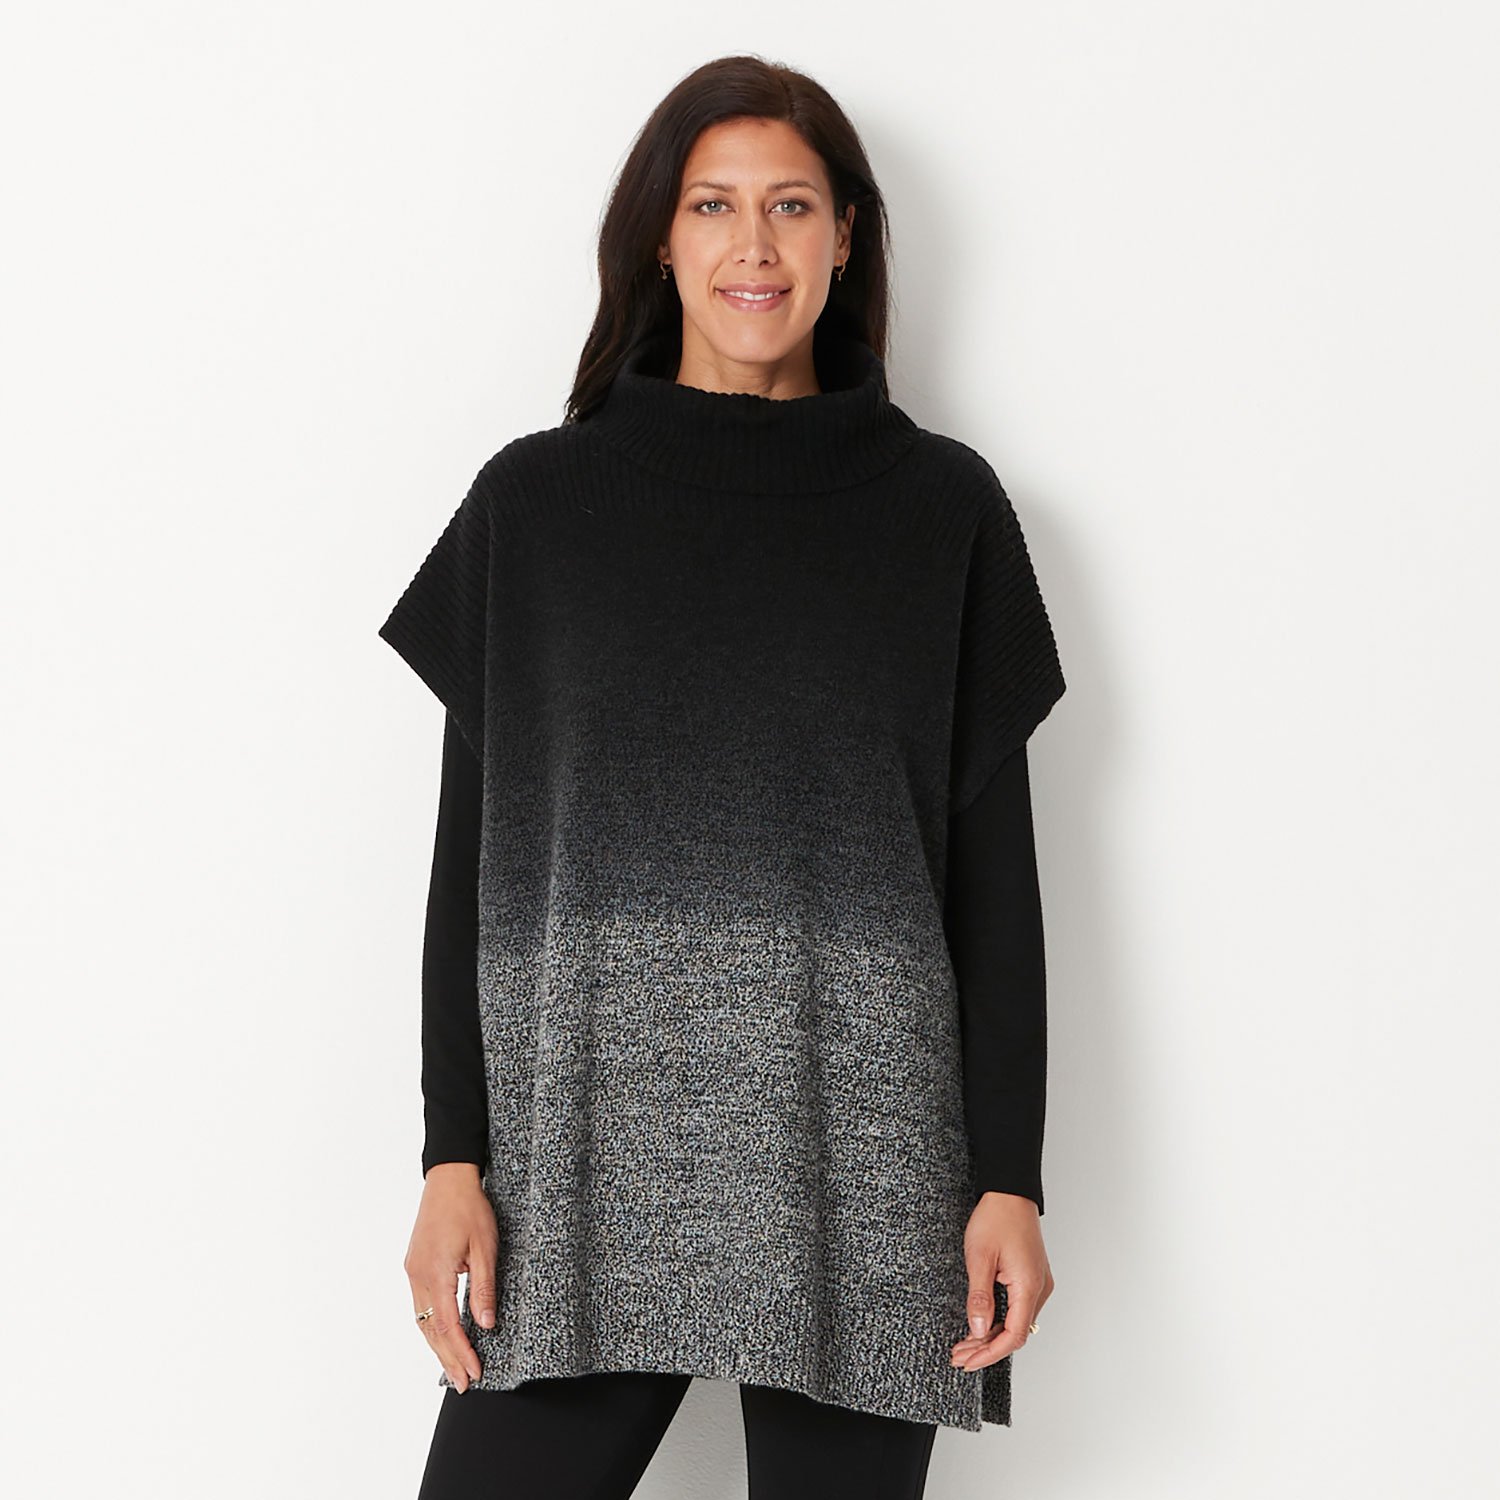 This ombre poncho is amazing!  It has side splits and a short sleeve and is so good for layering.  Looks great with a slim leg pant too.  Available in store and online now.

#winter #stylish #contemporary #quality